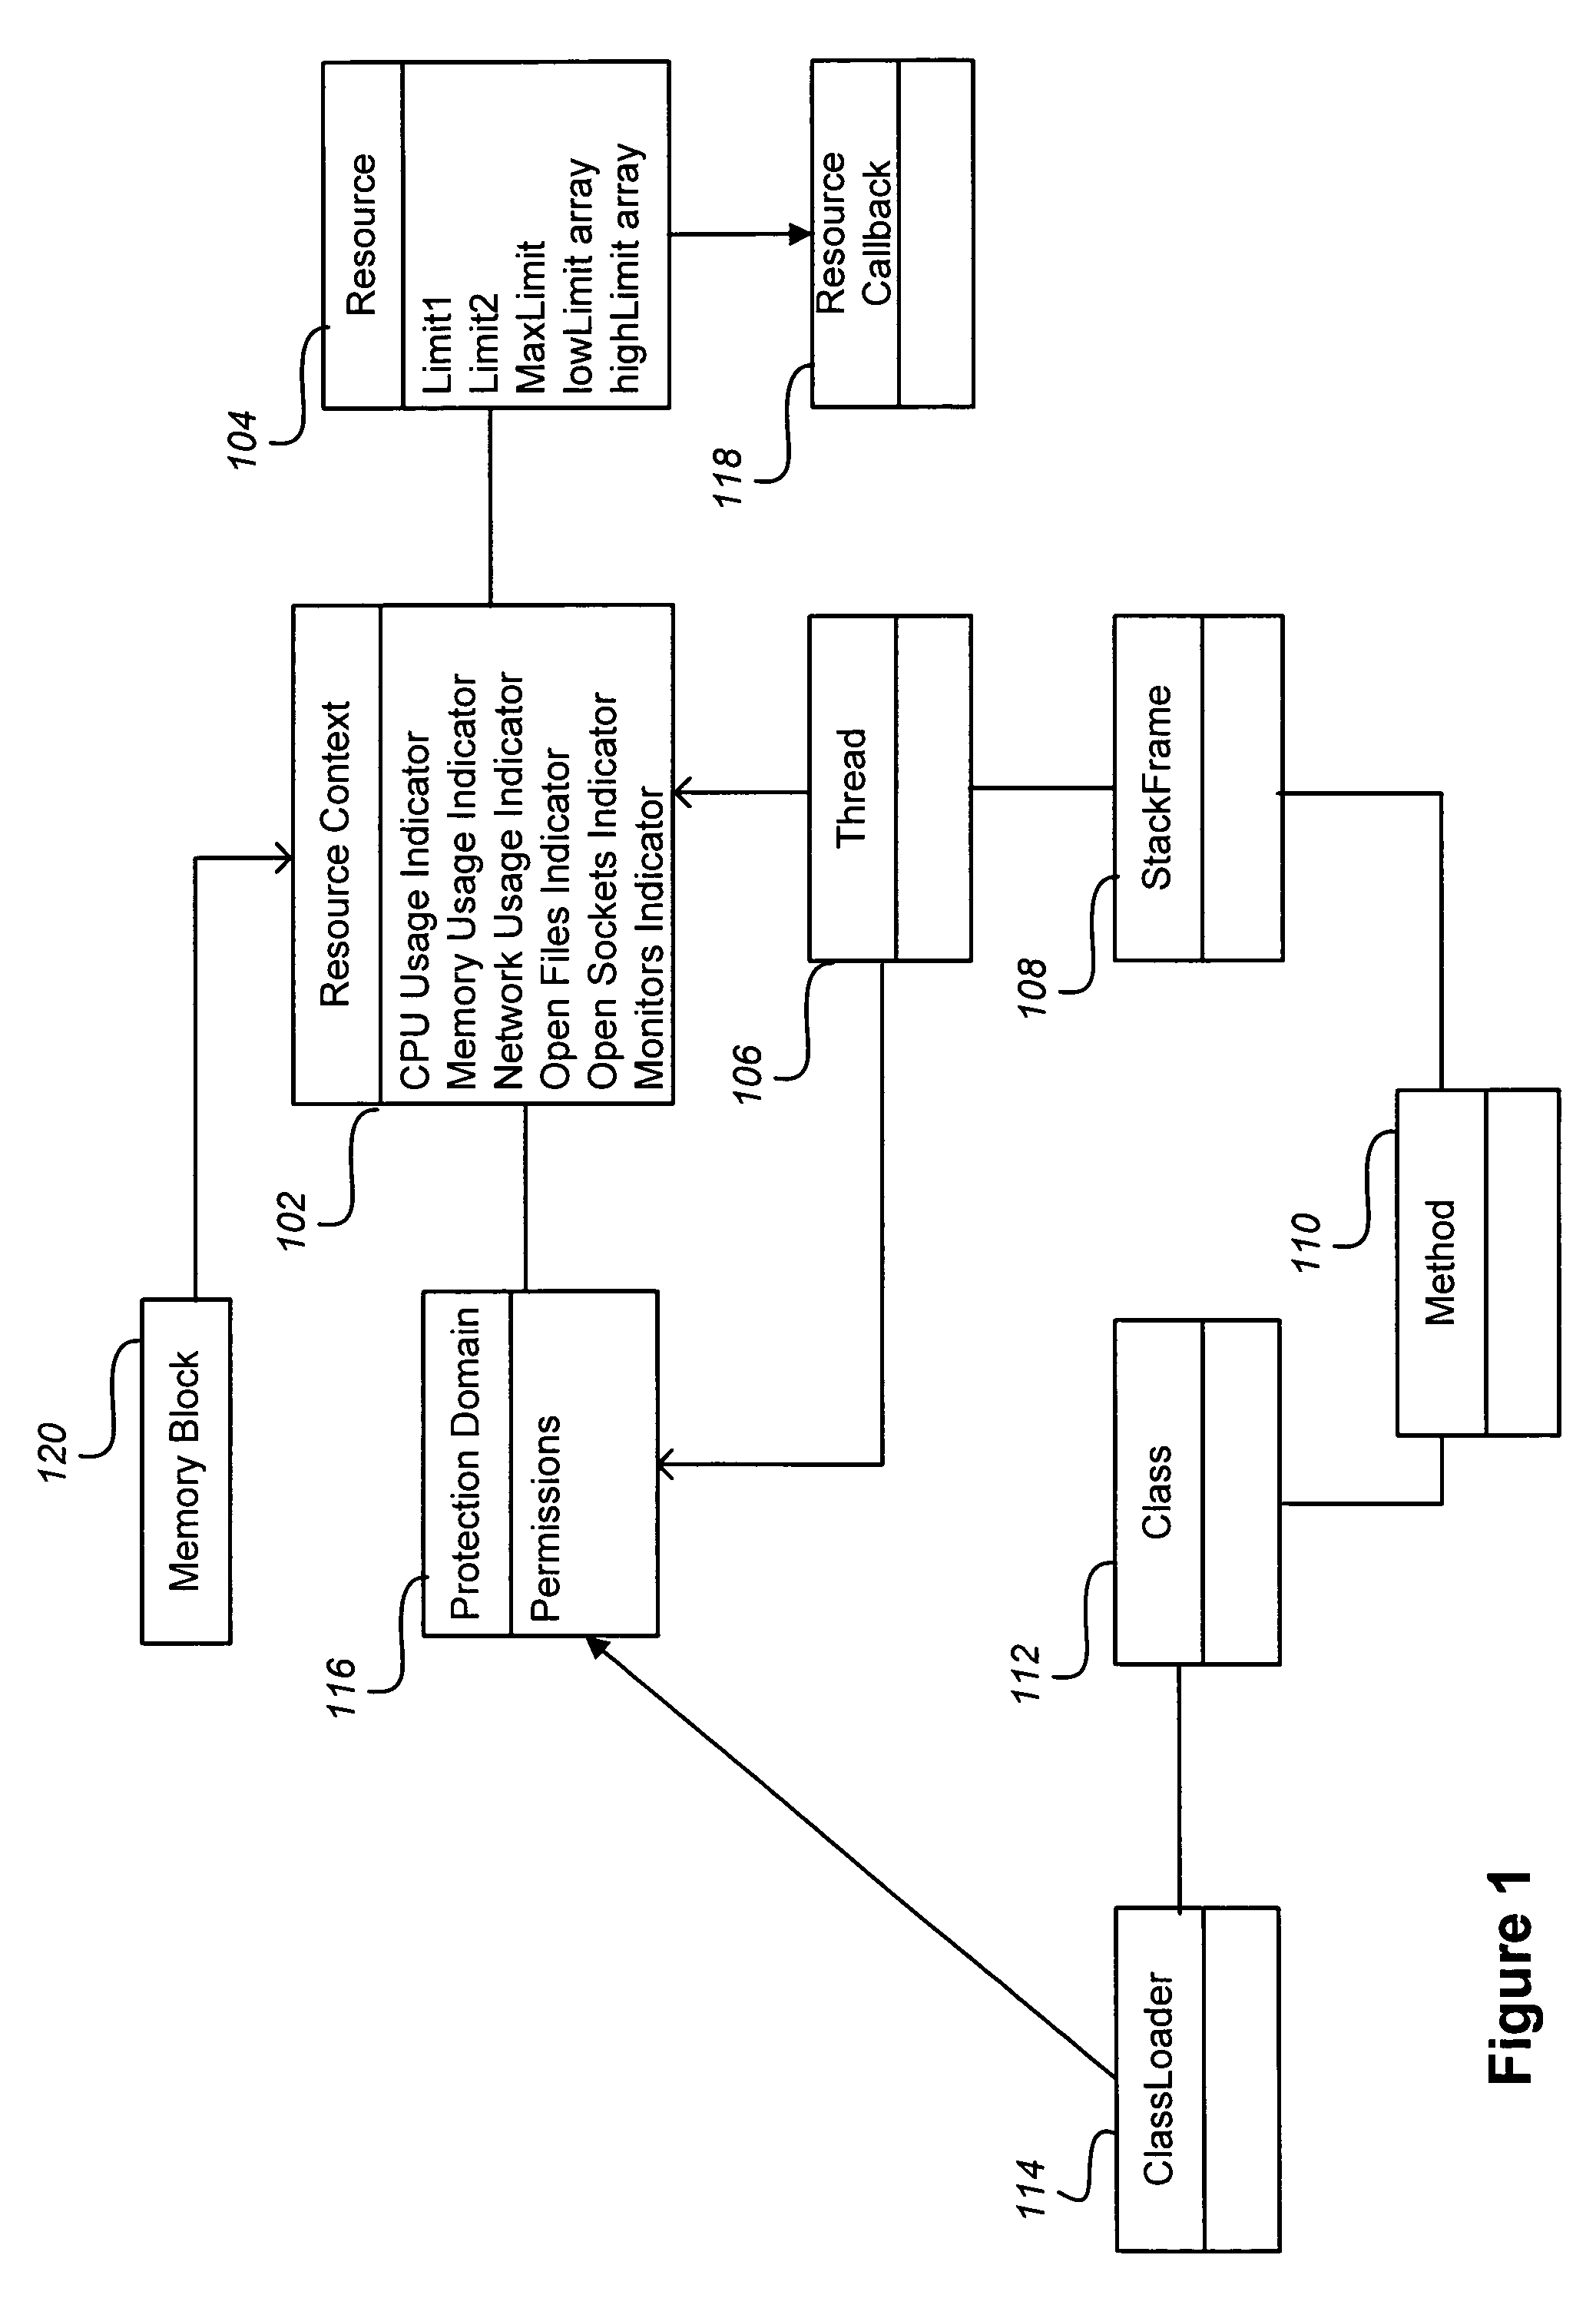 Apparatus and methods for managing resource usage